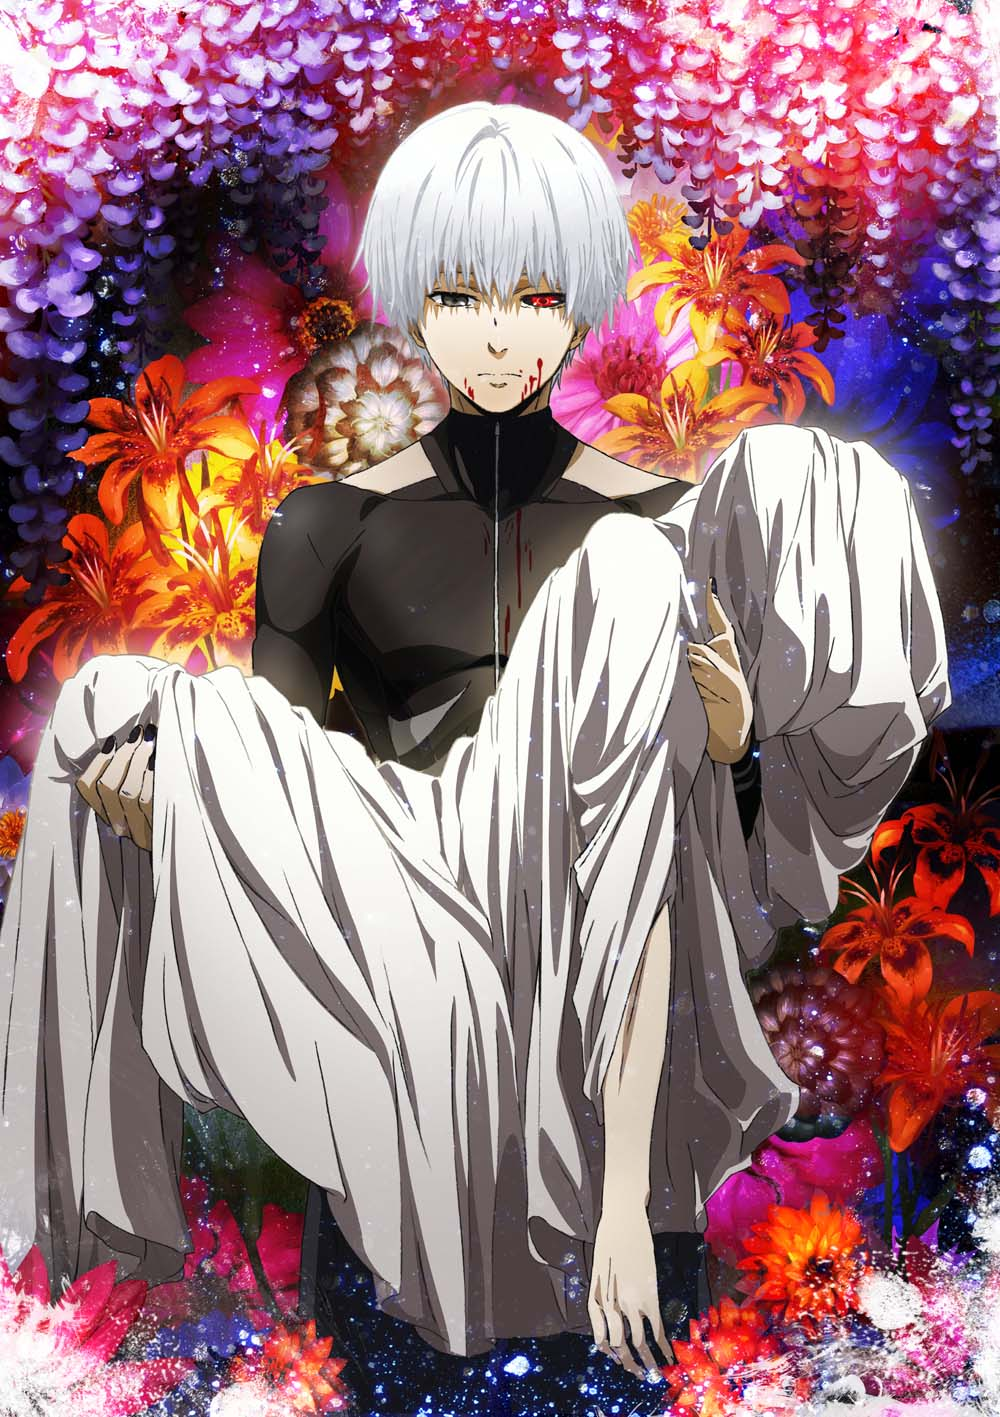 Top 25 Strongest Characters in Tokyo Ghoul Ranked